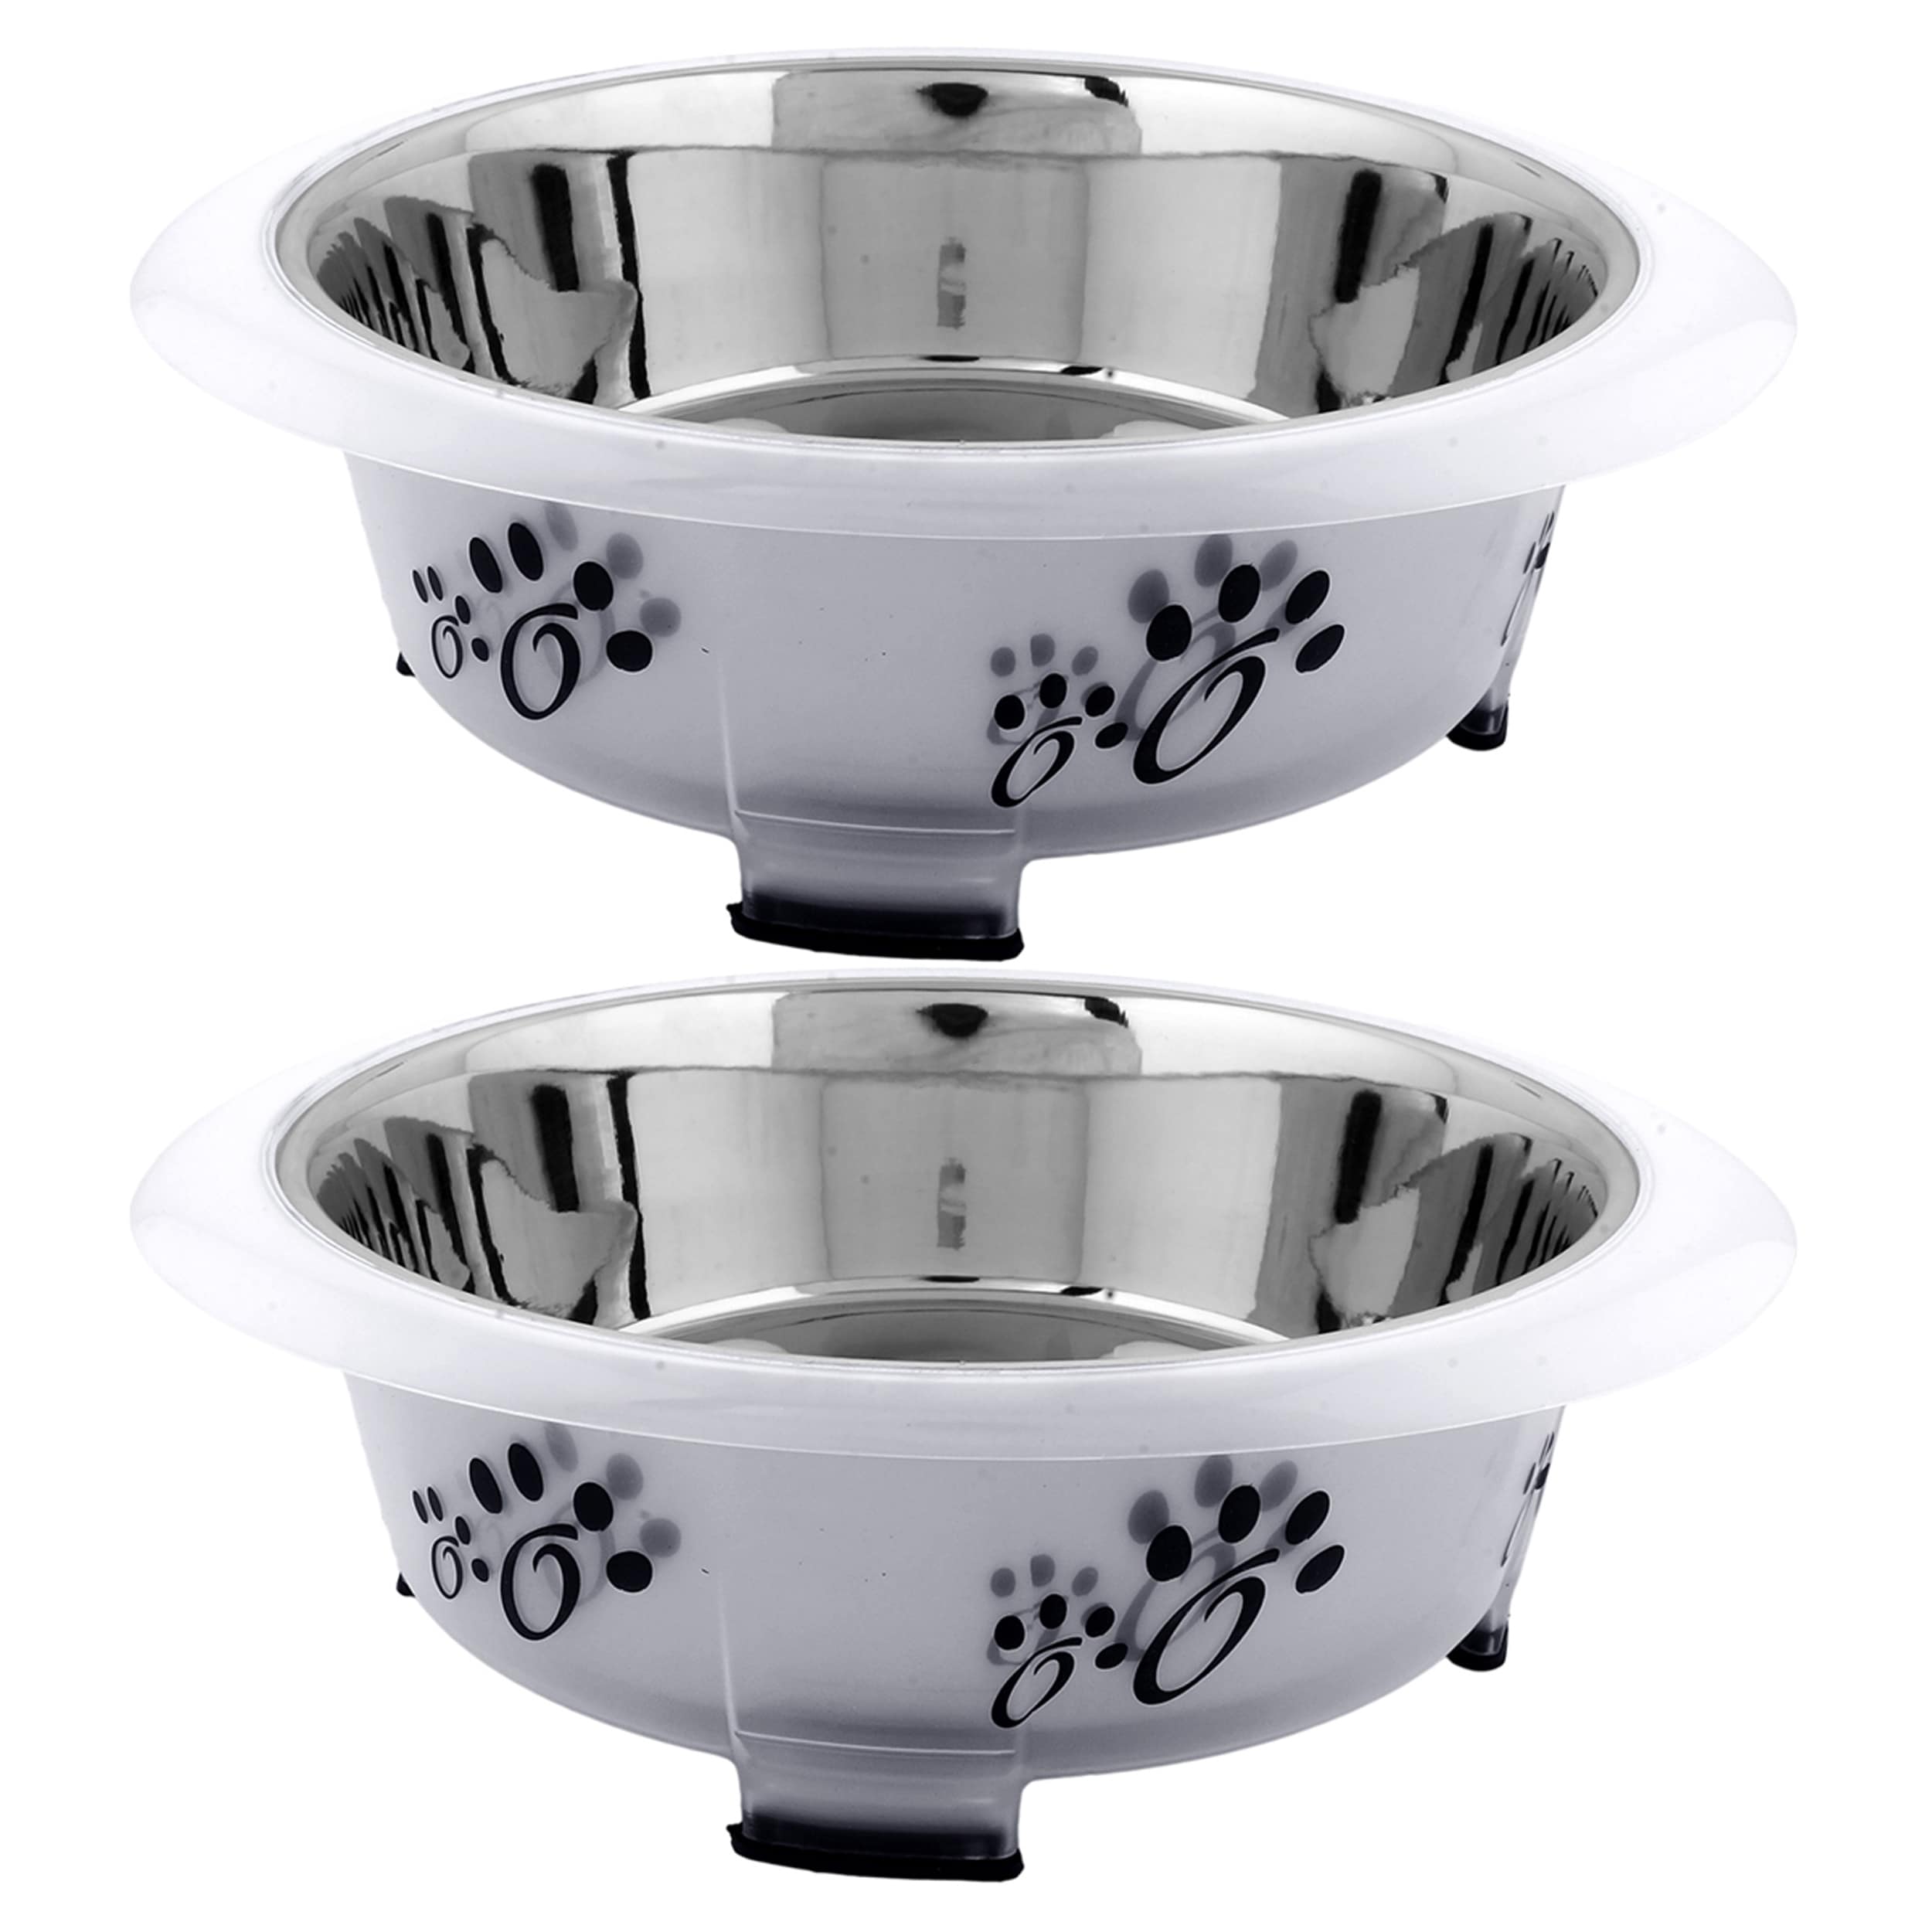 HANAMYA Dog Food/Treats Dispensing Container Toy | Interactive Pet Toy | Slower Feeder with Press Button, White